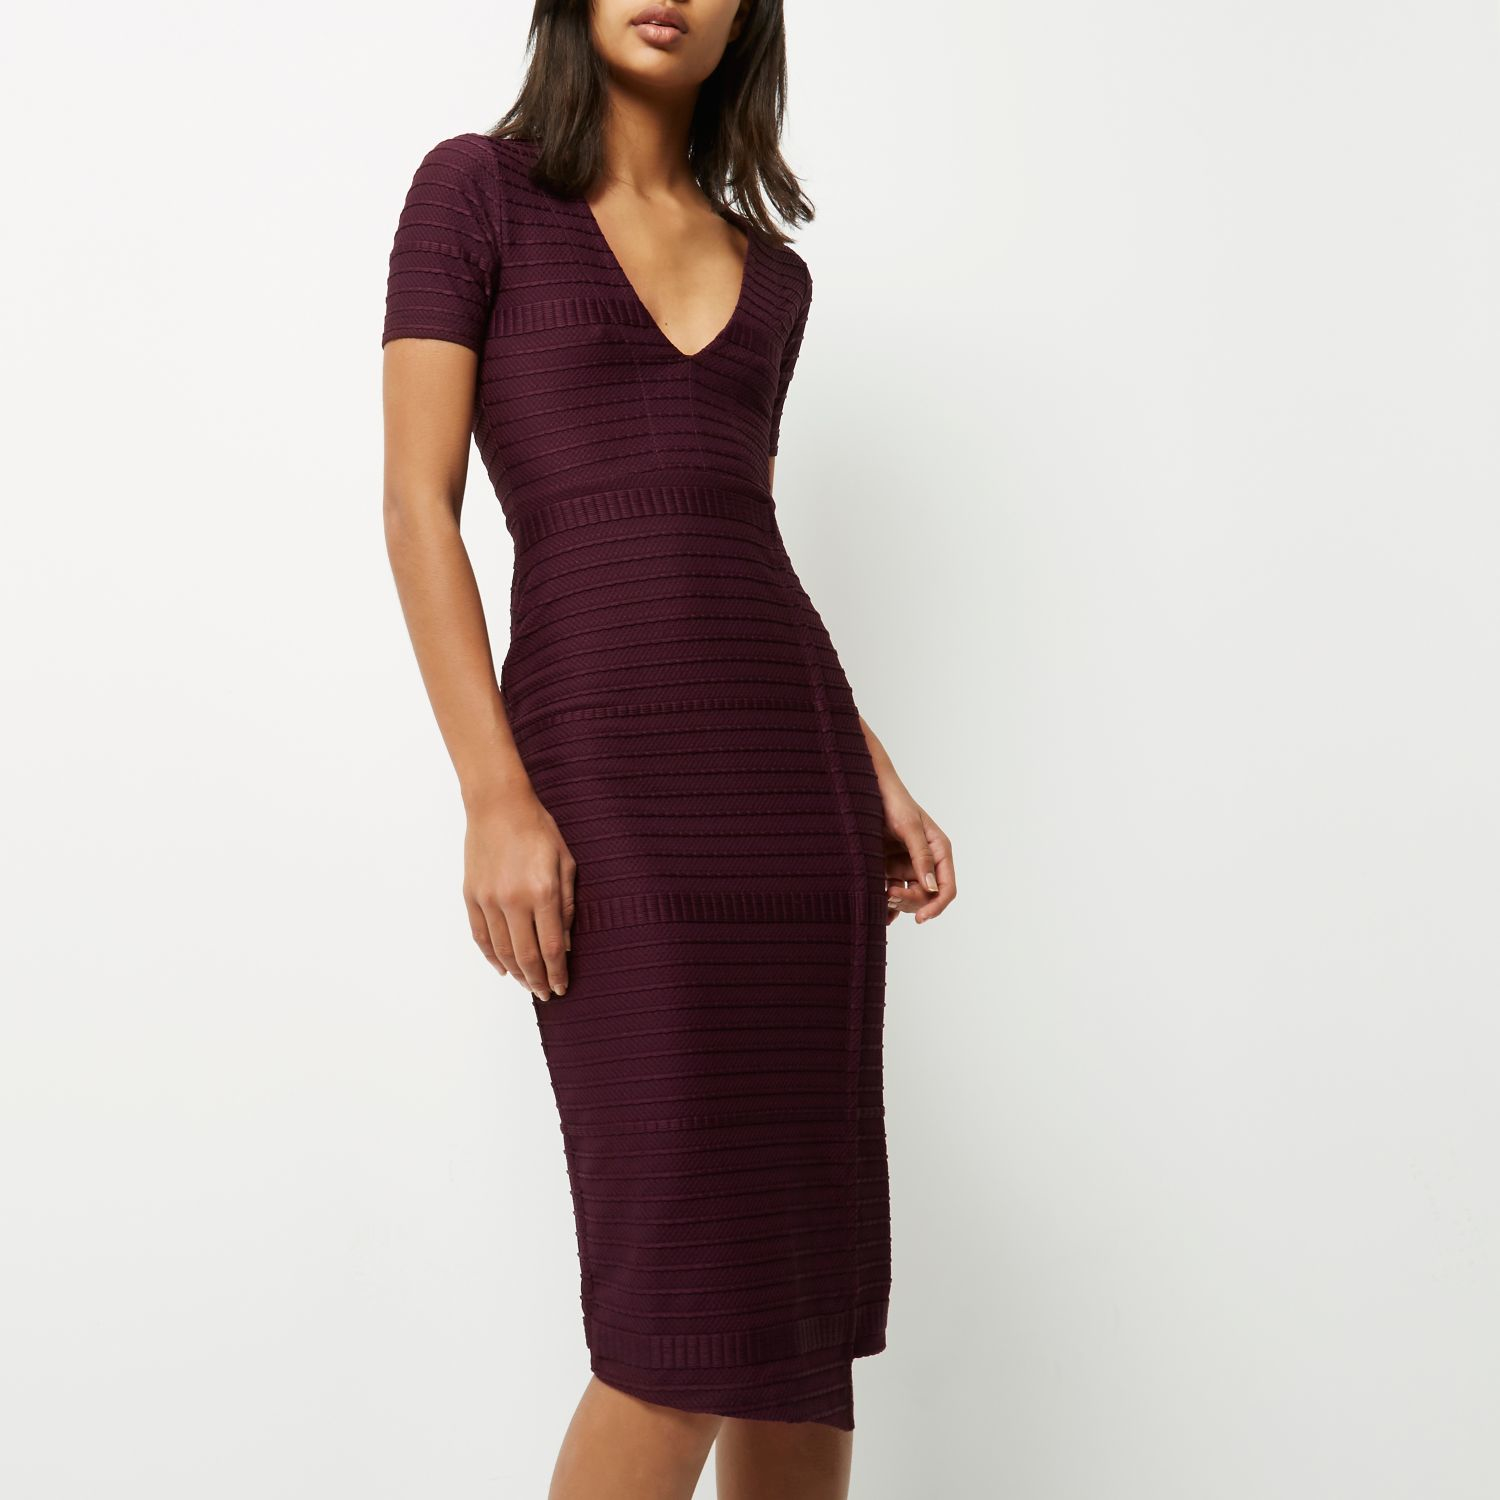 River Island Ribbed Dress - Fashion Show Collection